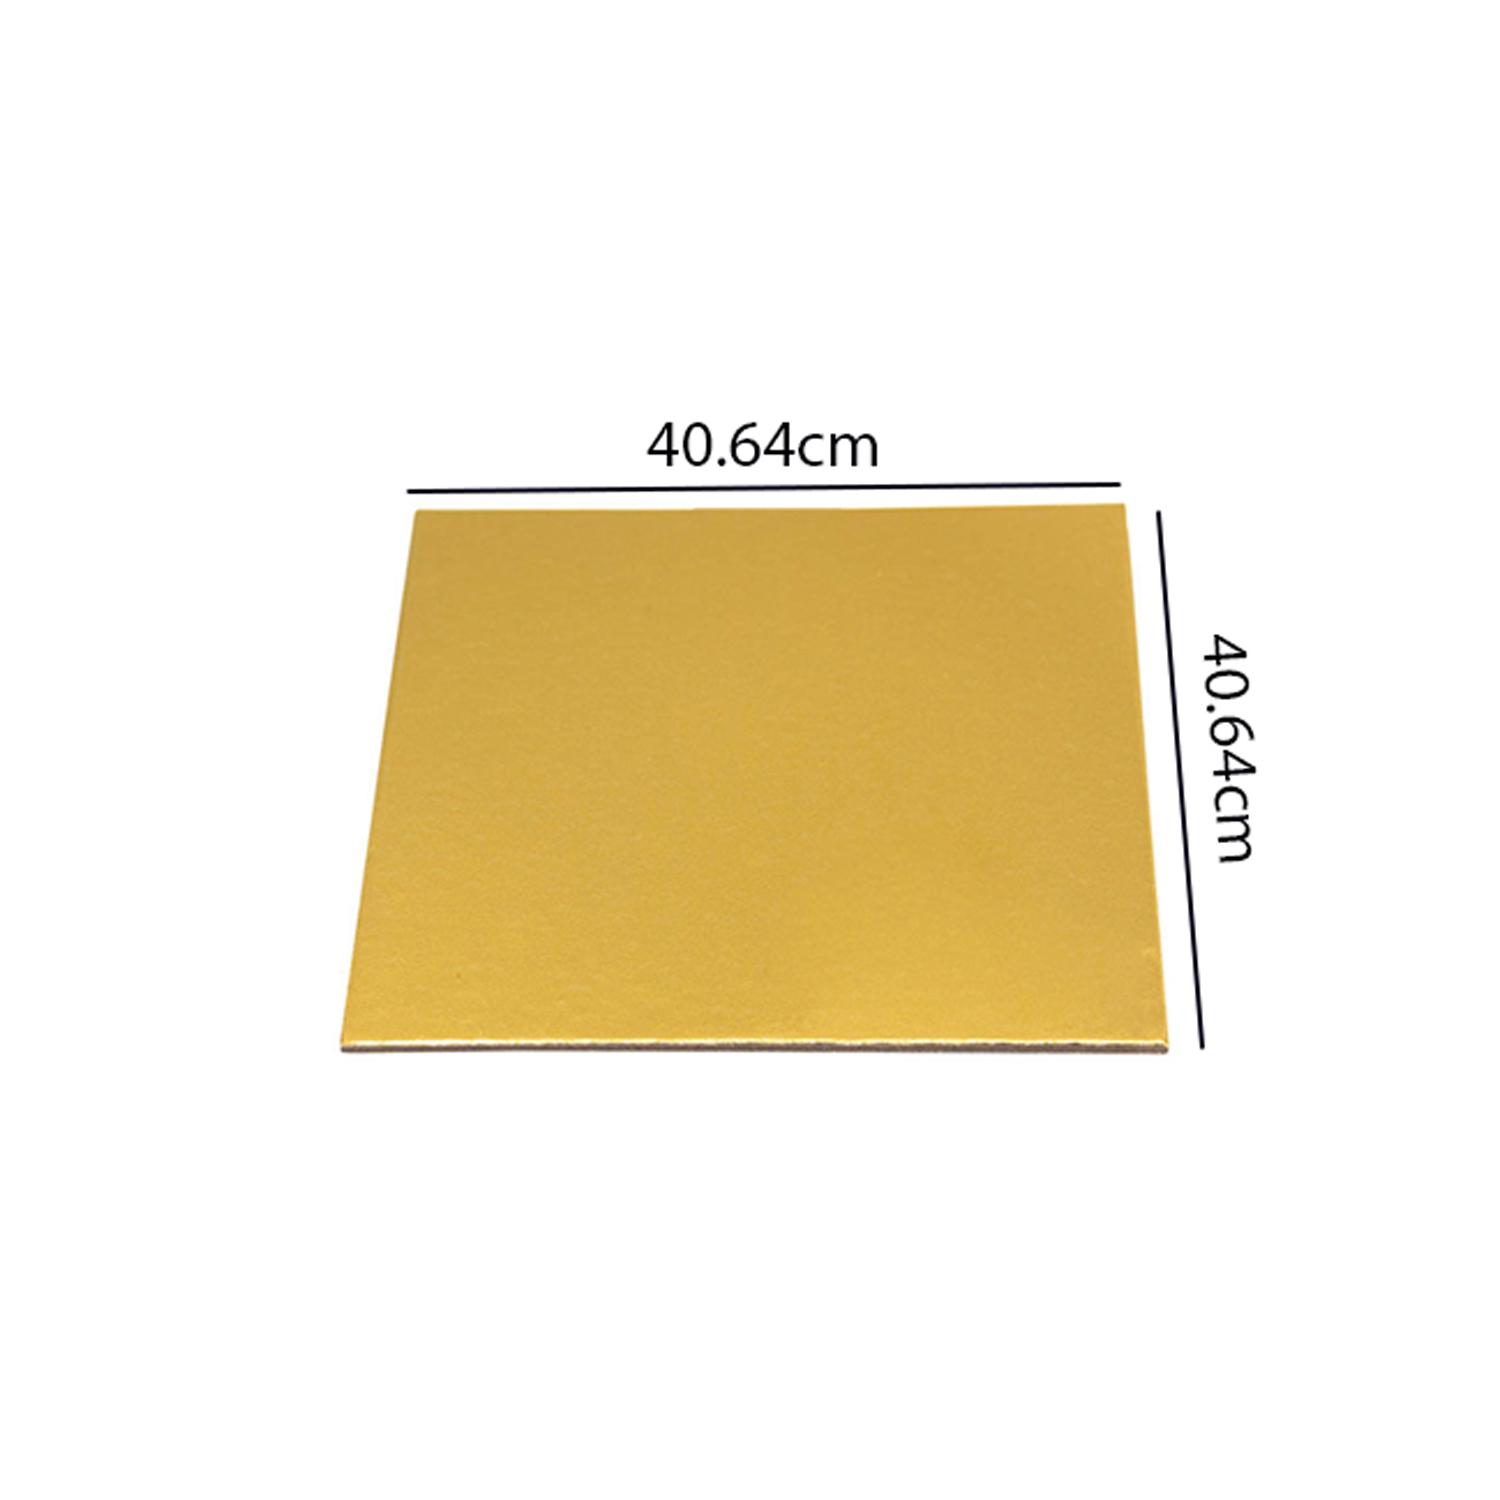 16'' SQUARE SMOOTH GOLD CAKE BOARD